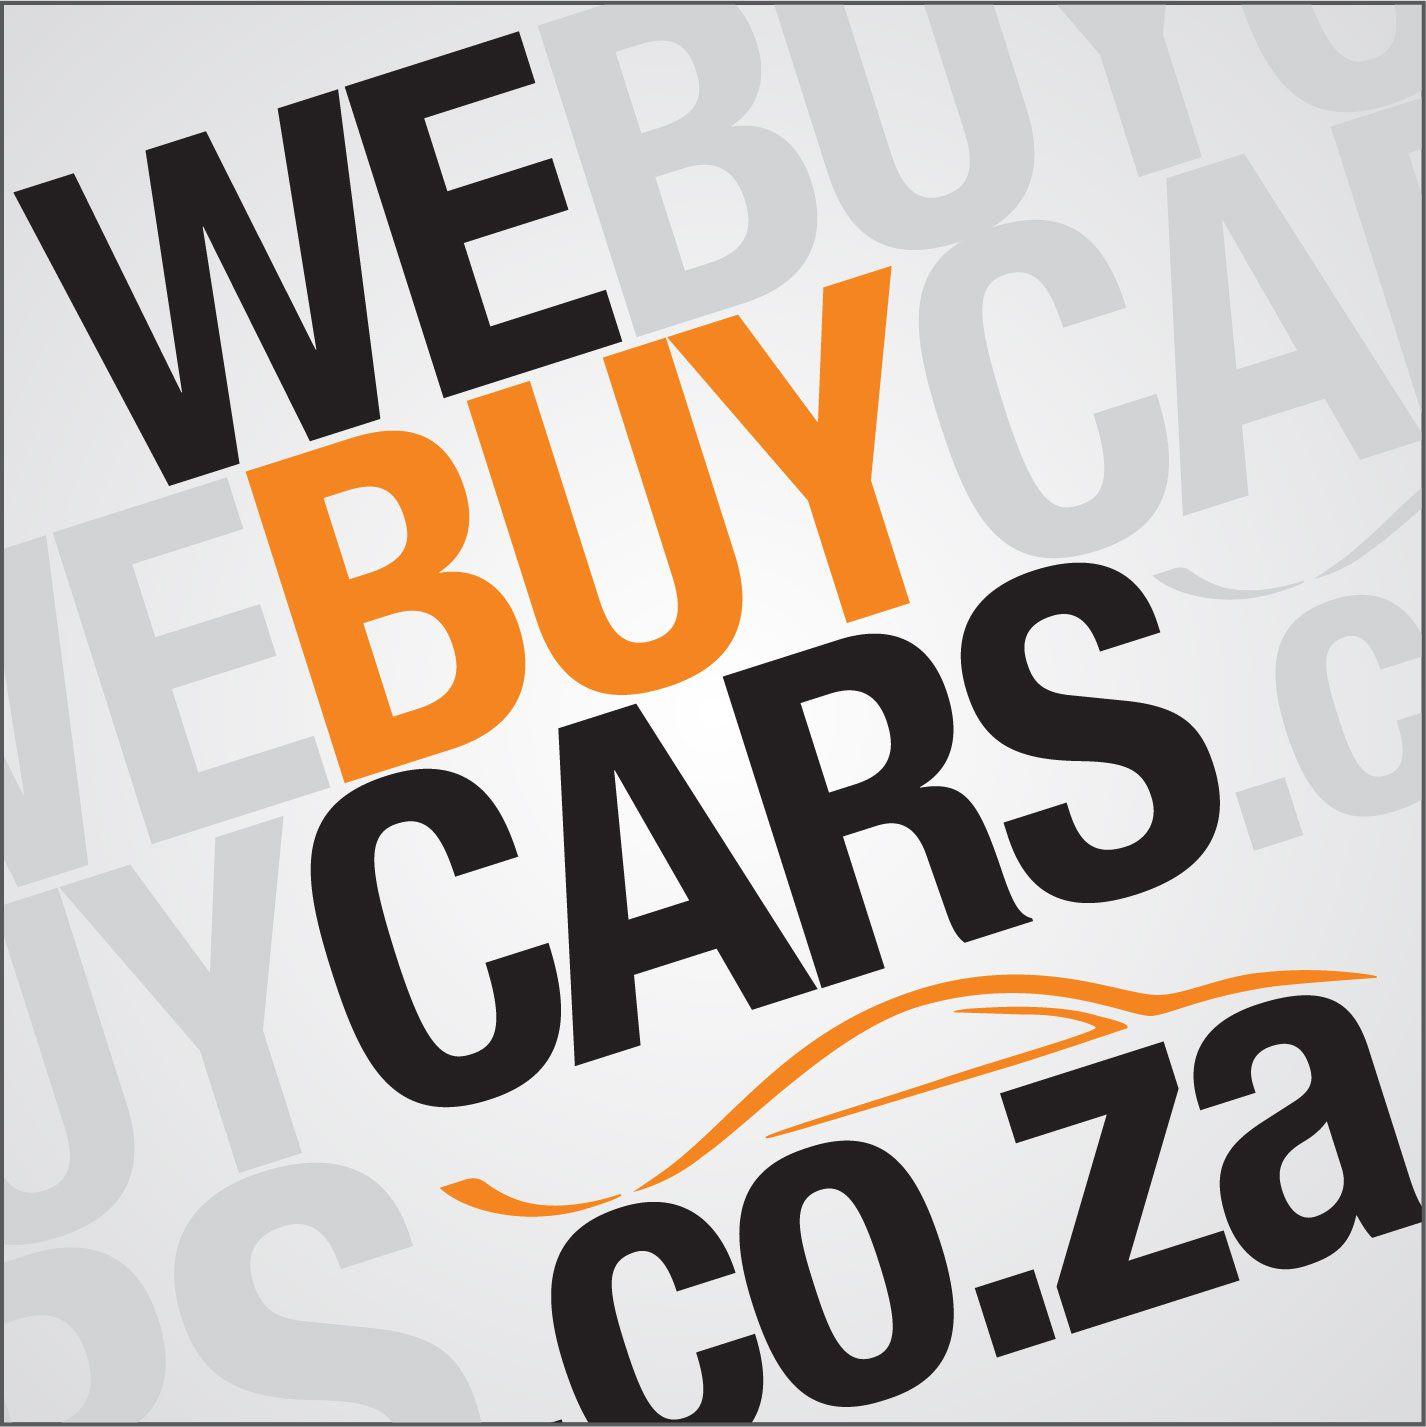 Cars.com Logo - We Buy Cars. Sell Cars For Cash. Free Online Vehicle Valuations